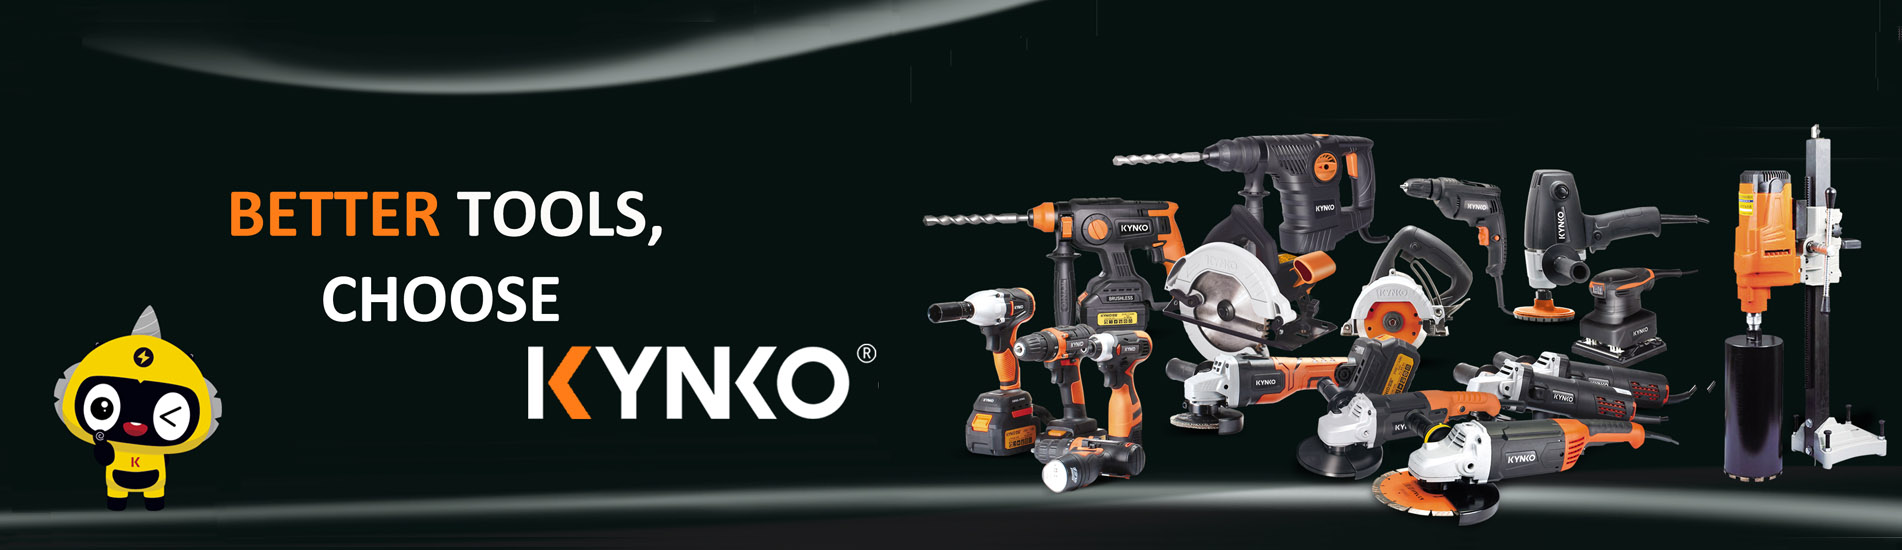 KYNKO Power Tools products